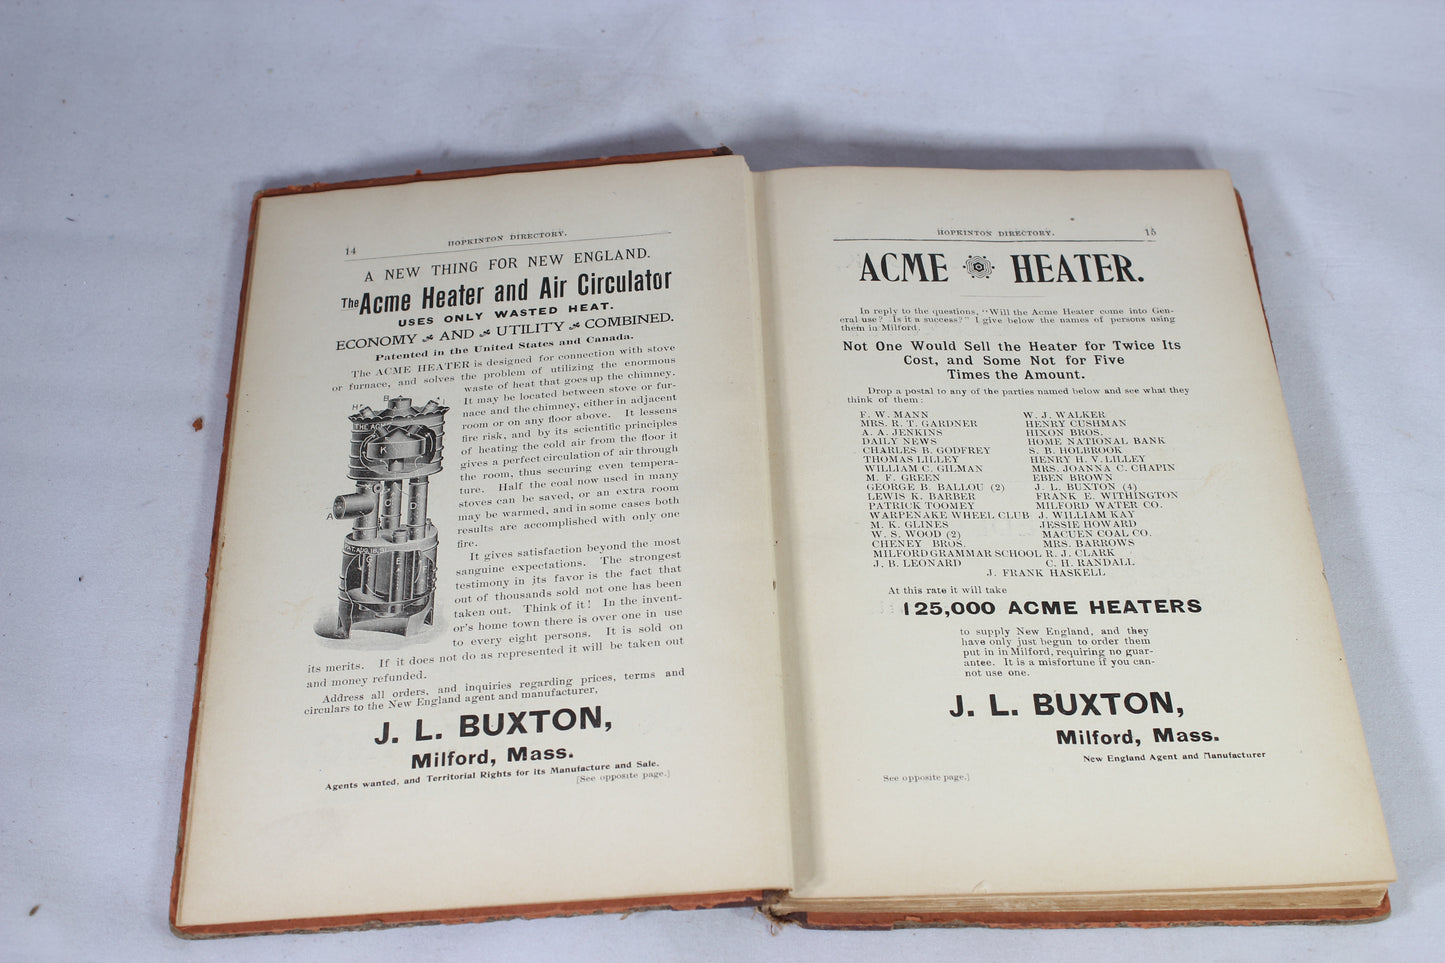 Resident and Business Directory of Hopkinton and Holliston Massachusetts for 1899